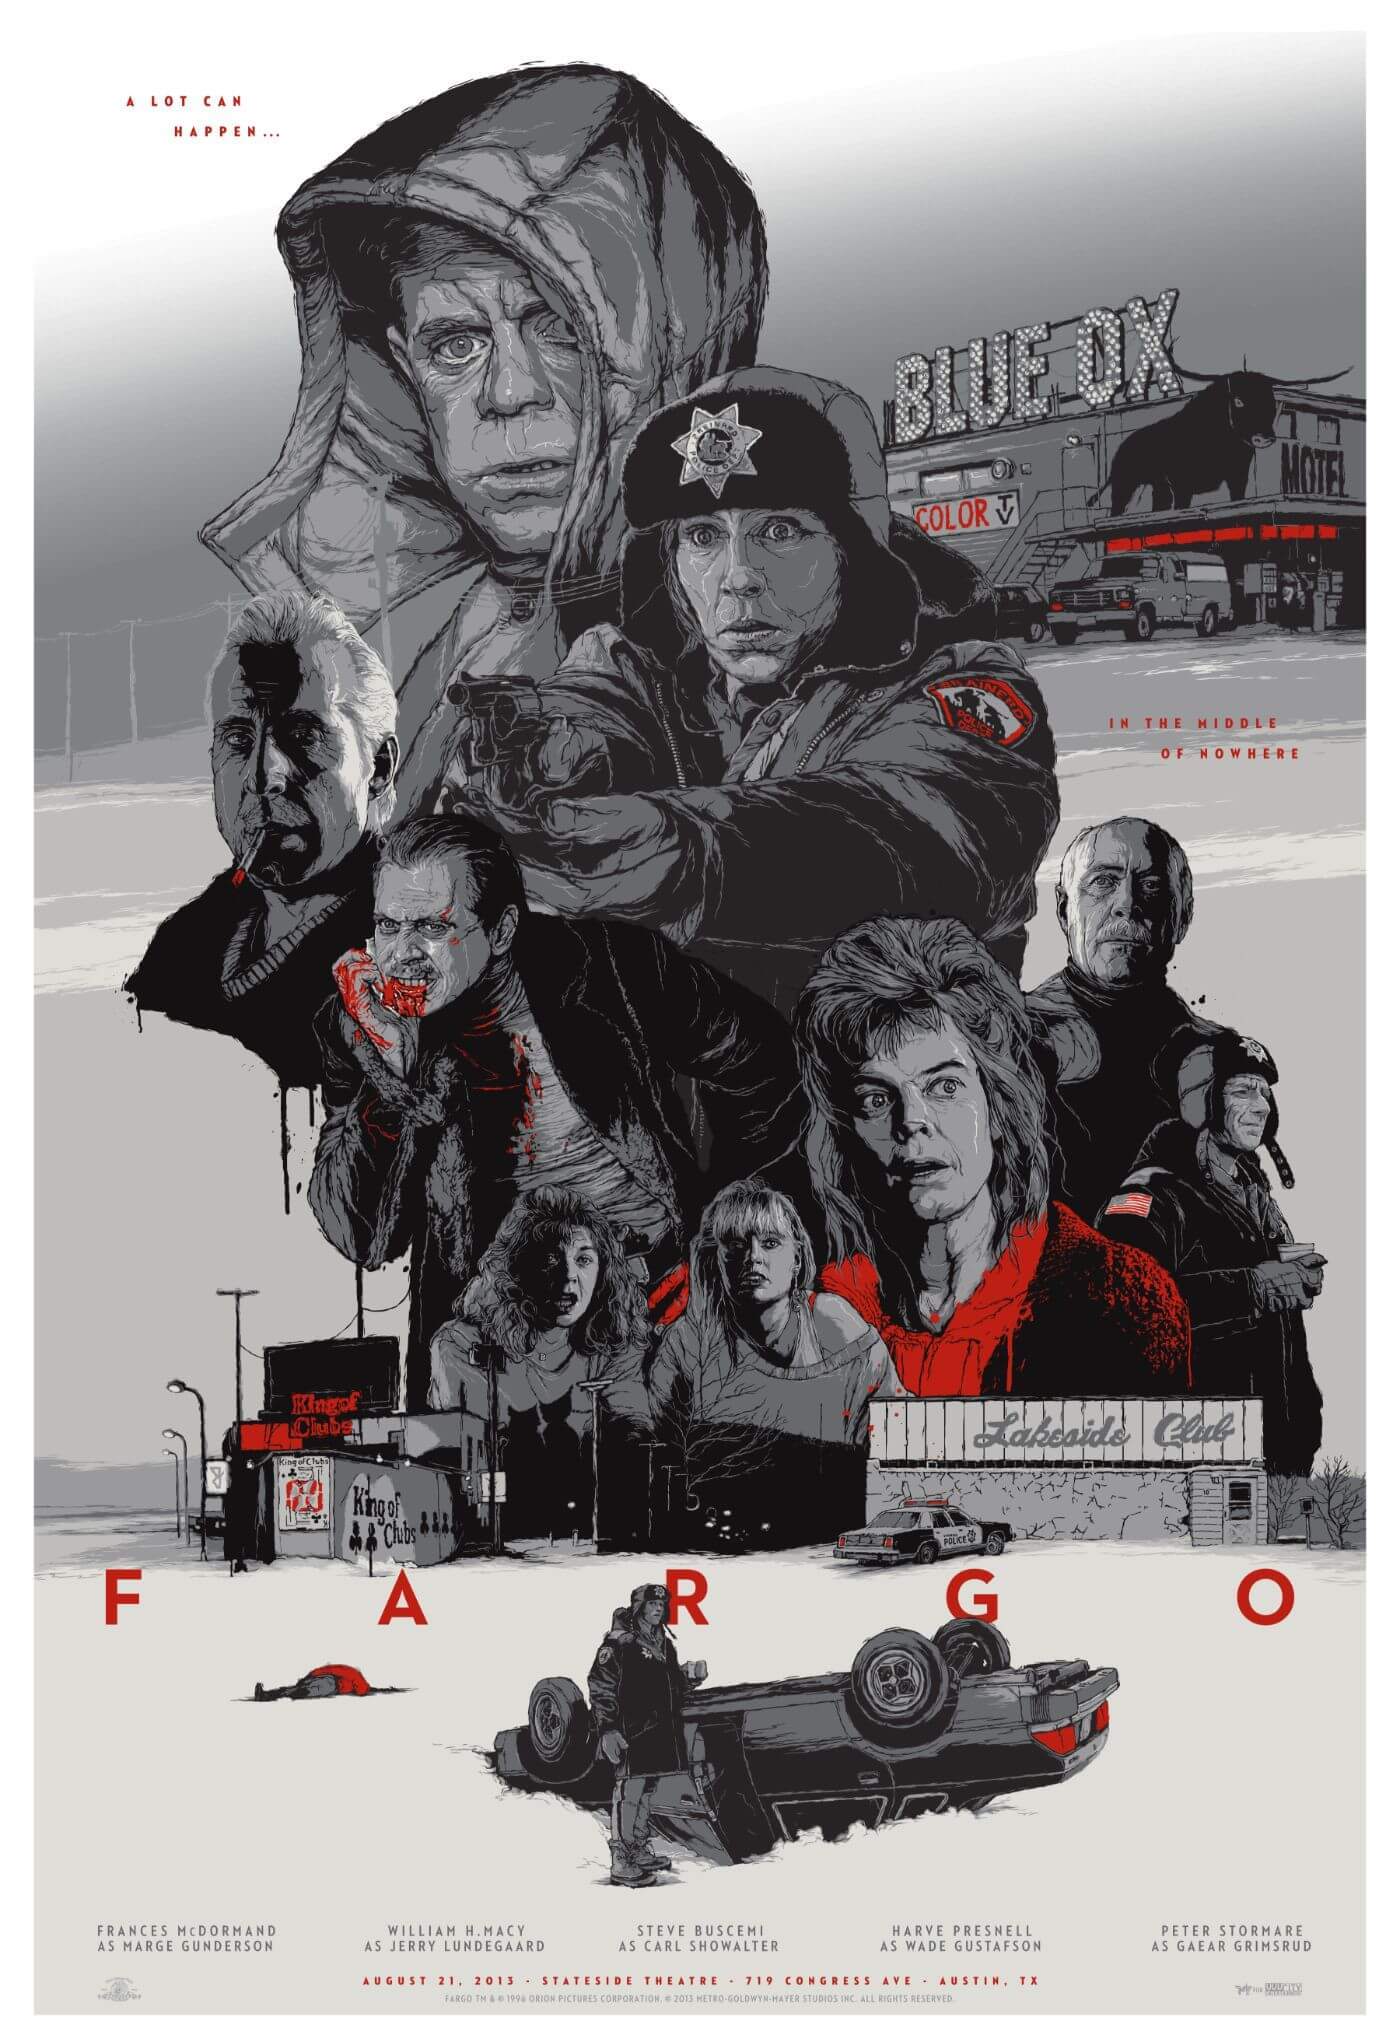 tårn Begrænse Litteratur Movie Poster Art - Fargo - Tallenge Hollywood Poster Collection - Art  Prints by Brooke | Buy Posters, Frames, Canvas & Digital Art Prints |  Small, Compact, Medium and Large Variants